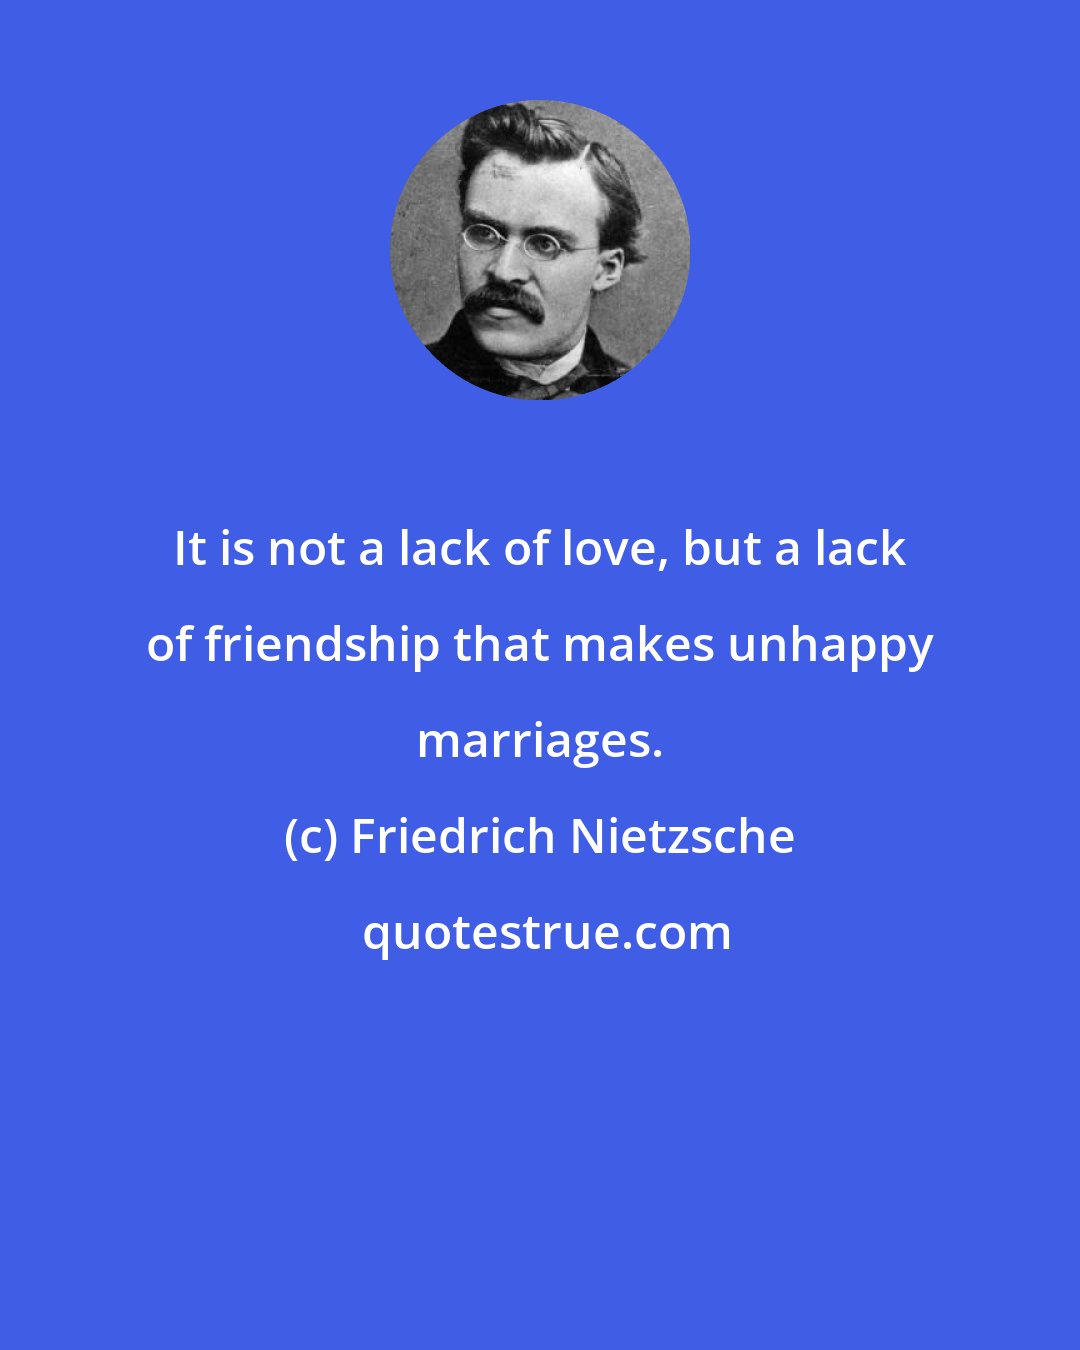 Friedrich Nietzsche: It is not a lack of love, but a lack of friendship that makes unhappy marriages.